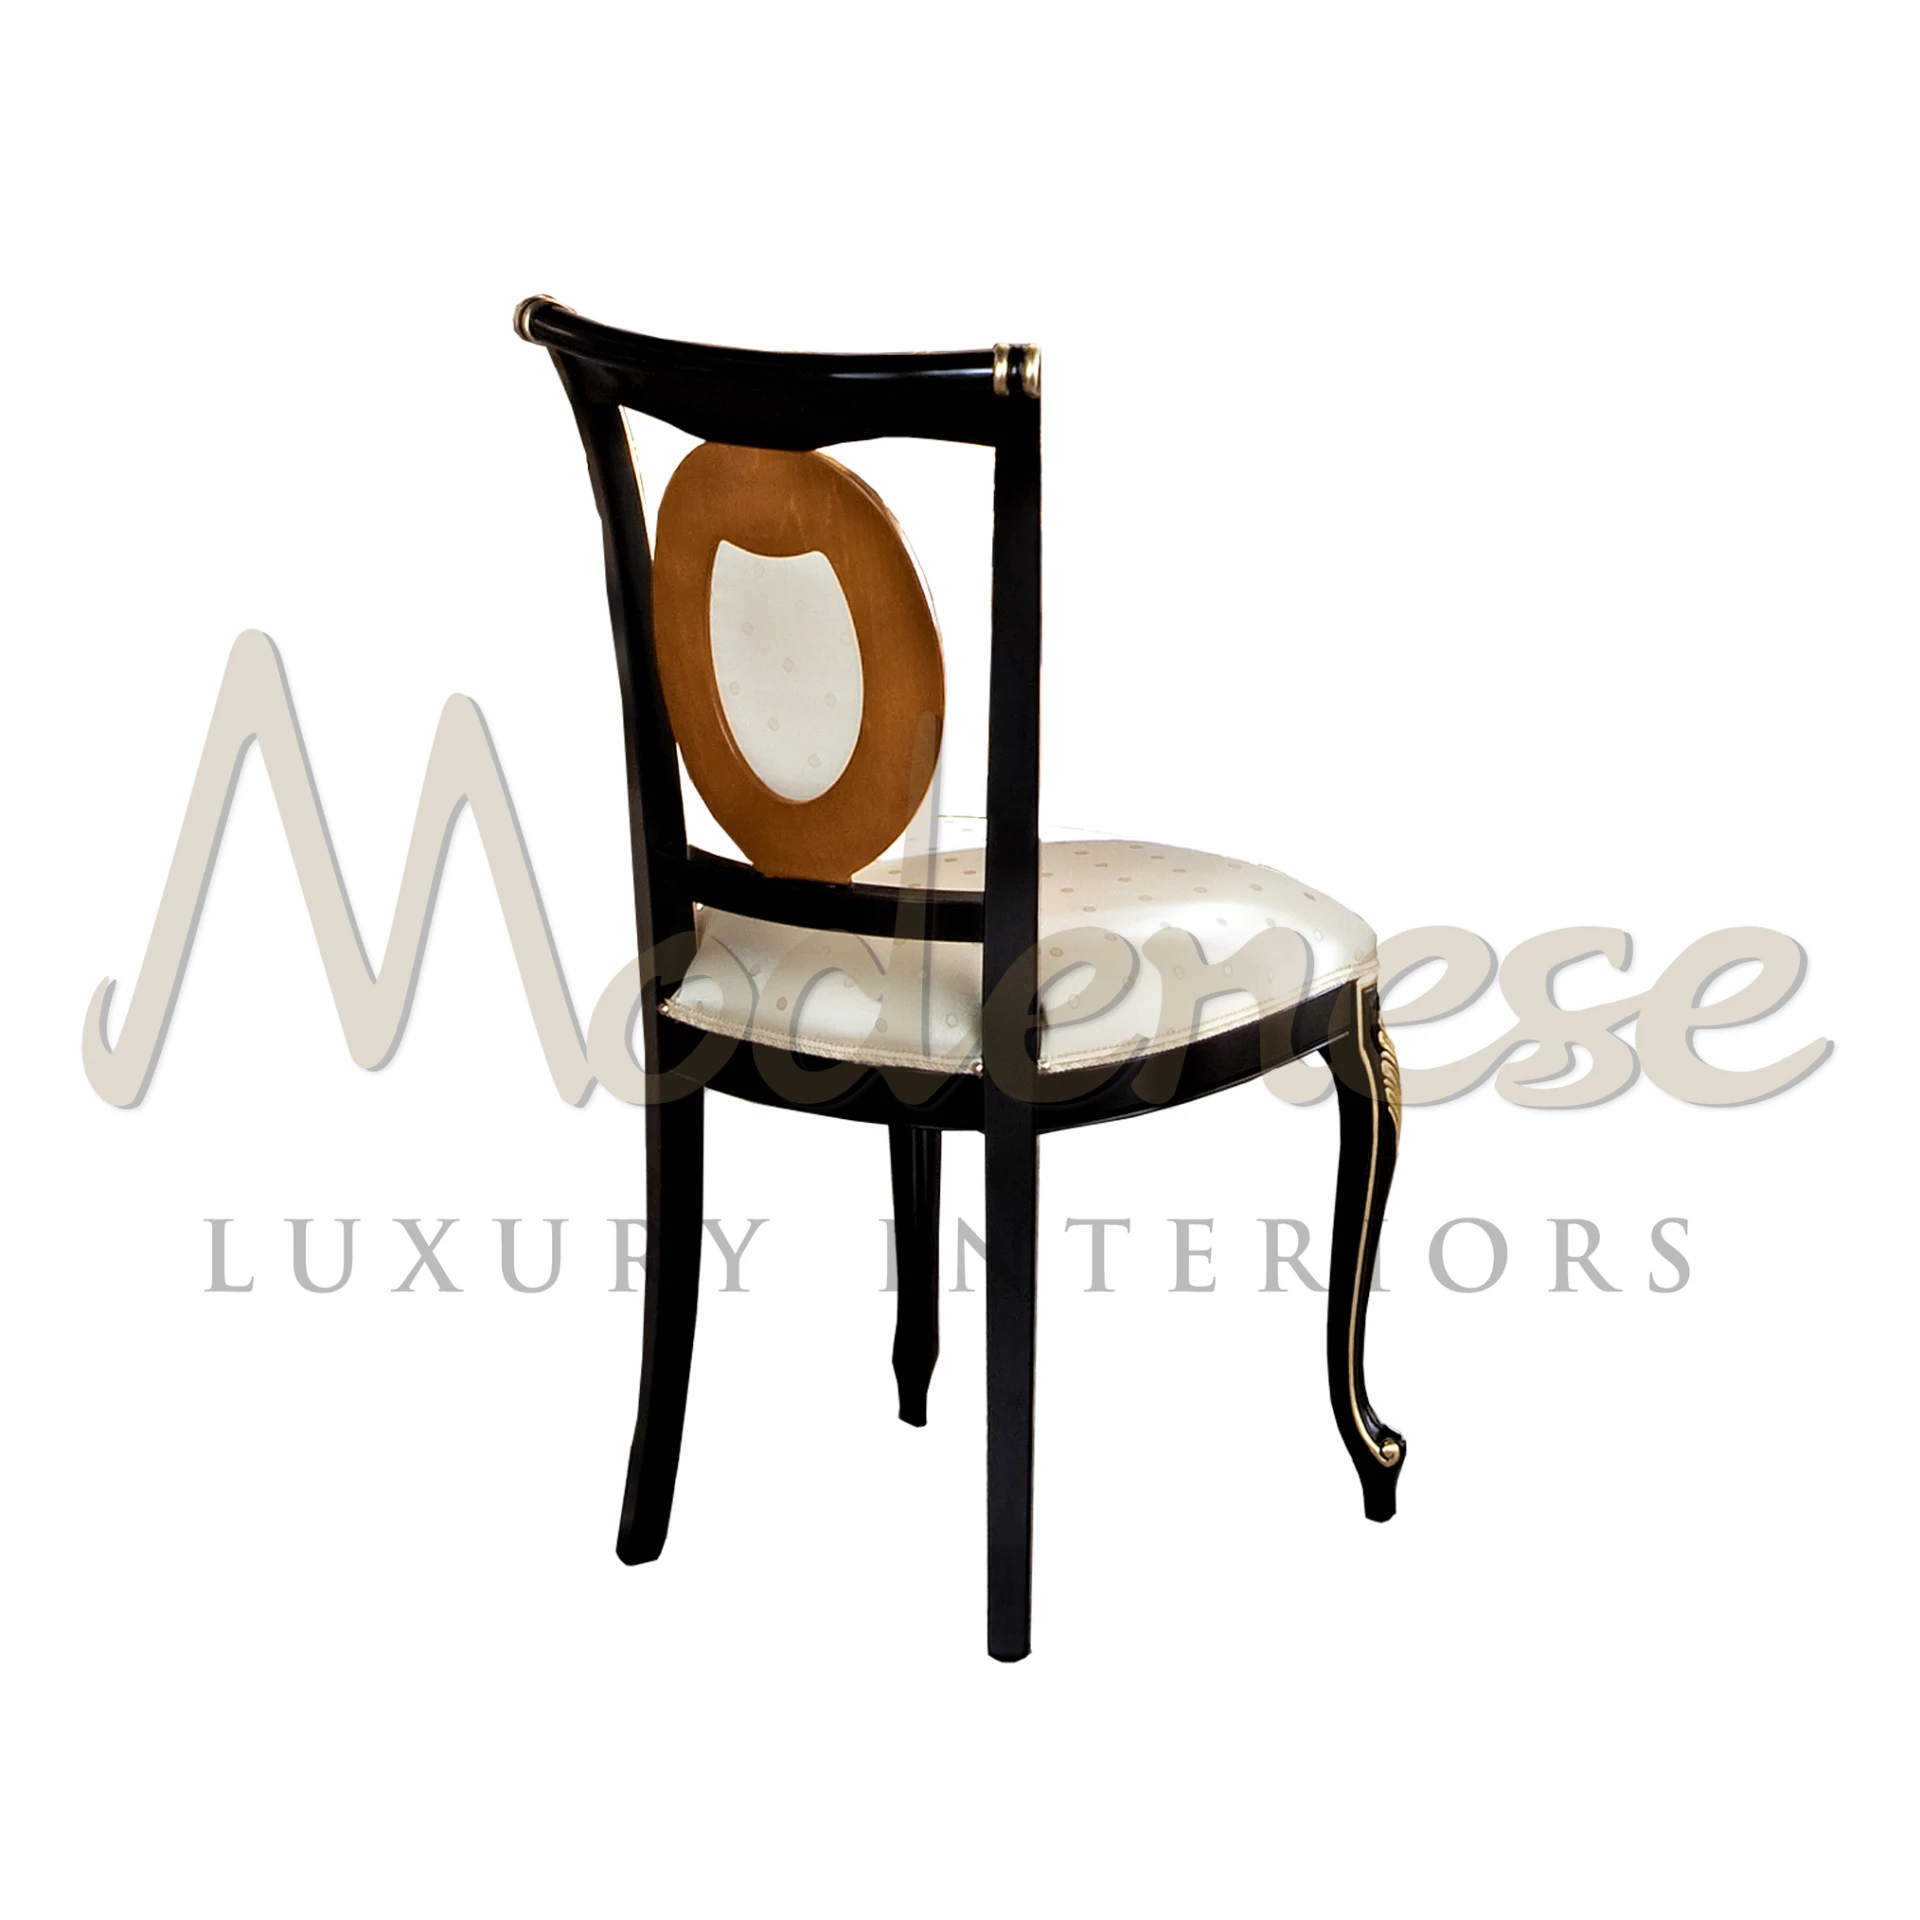 Handcrafted elegance with upholstered seating on black lacquered frame. Intricate golden details add charm. Customizable fabric and frame colors available.